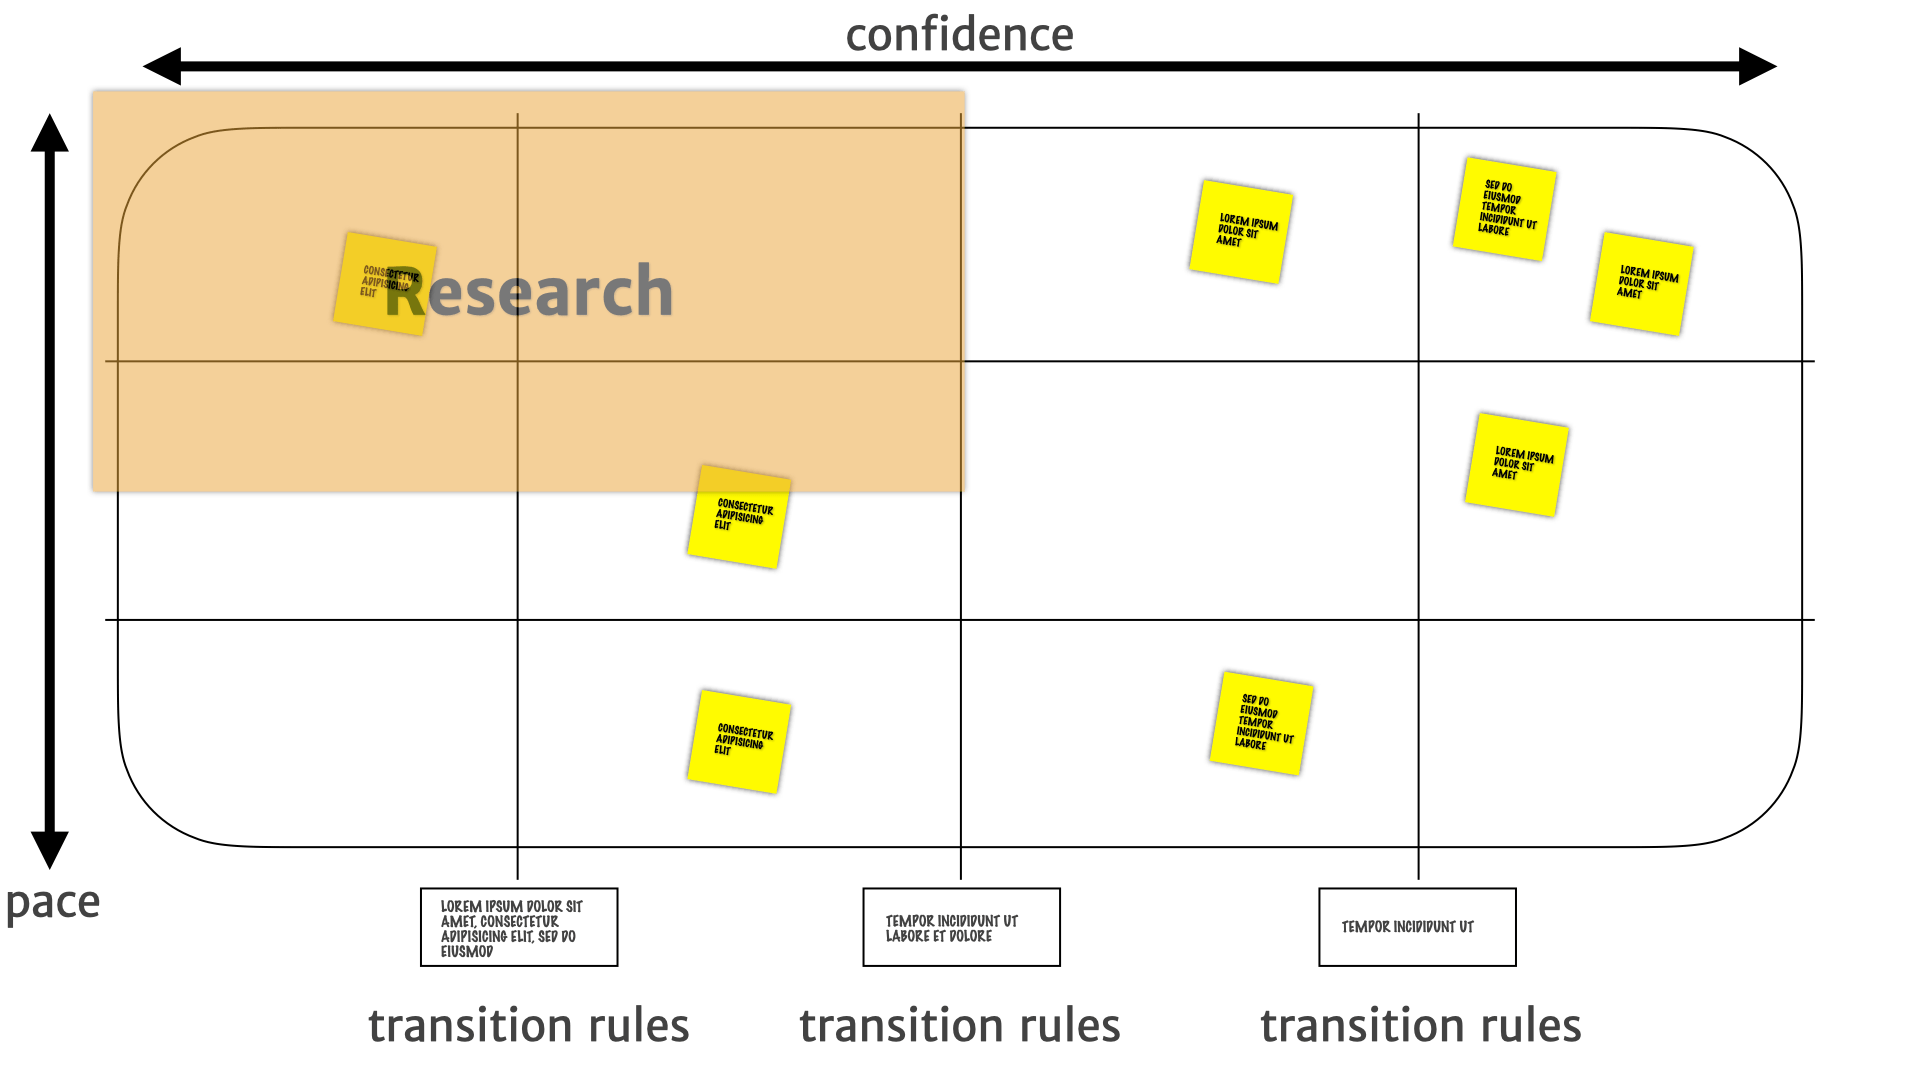 A pace layer map with the top-left quadrant highlighted and labelled 'research'.